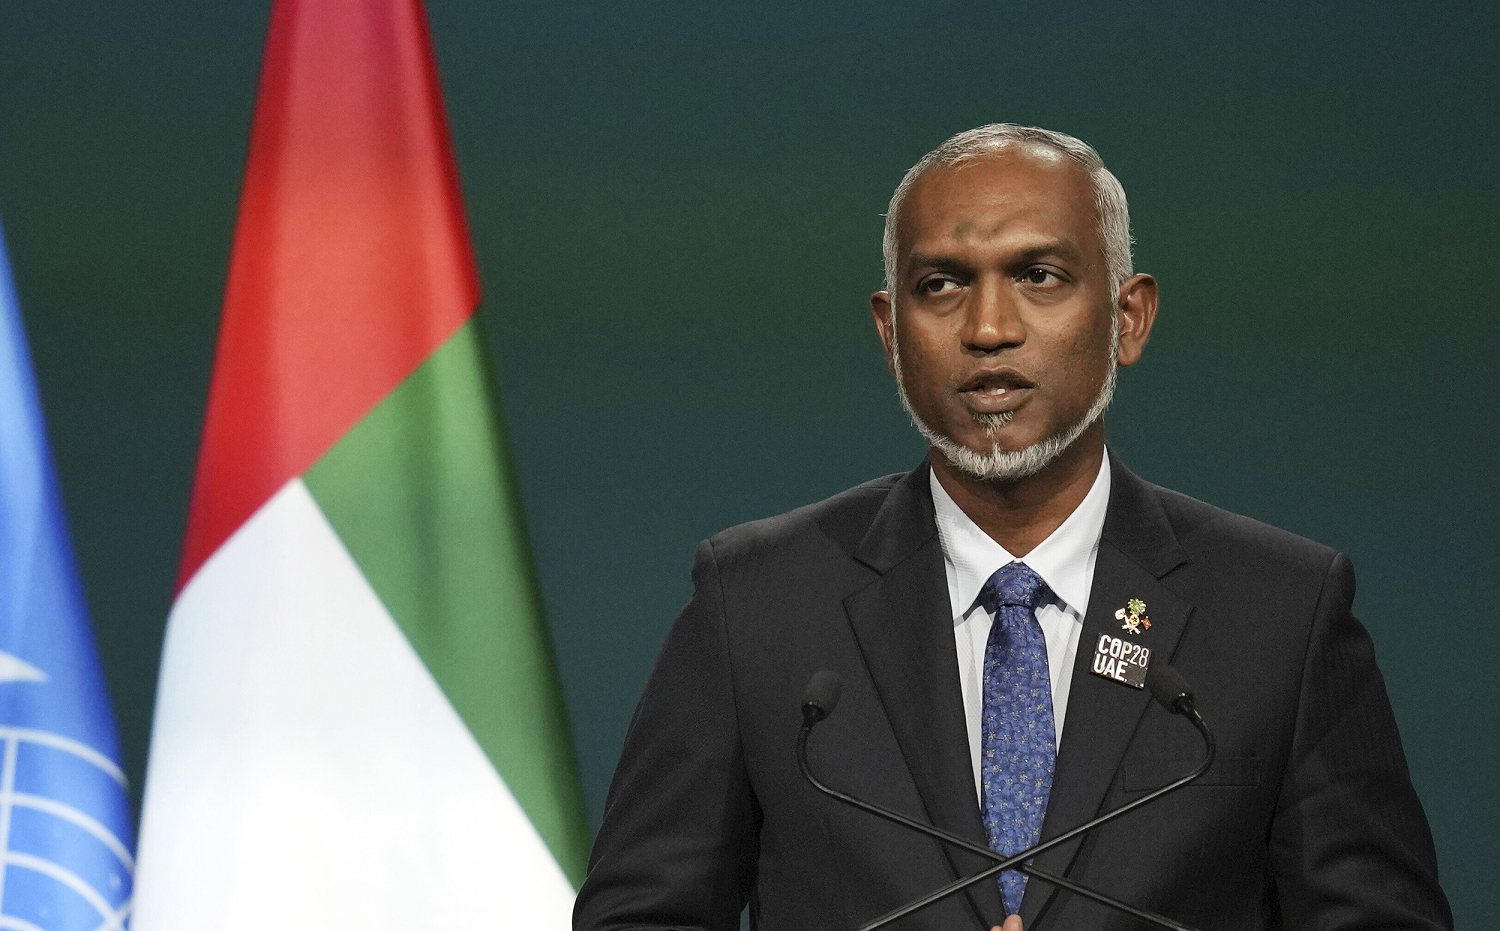 Maldives leader demands removal of Indian military by mid-March